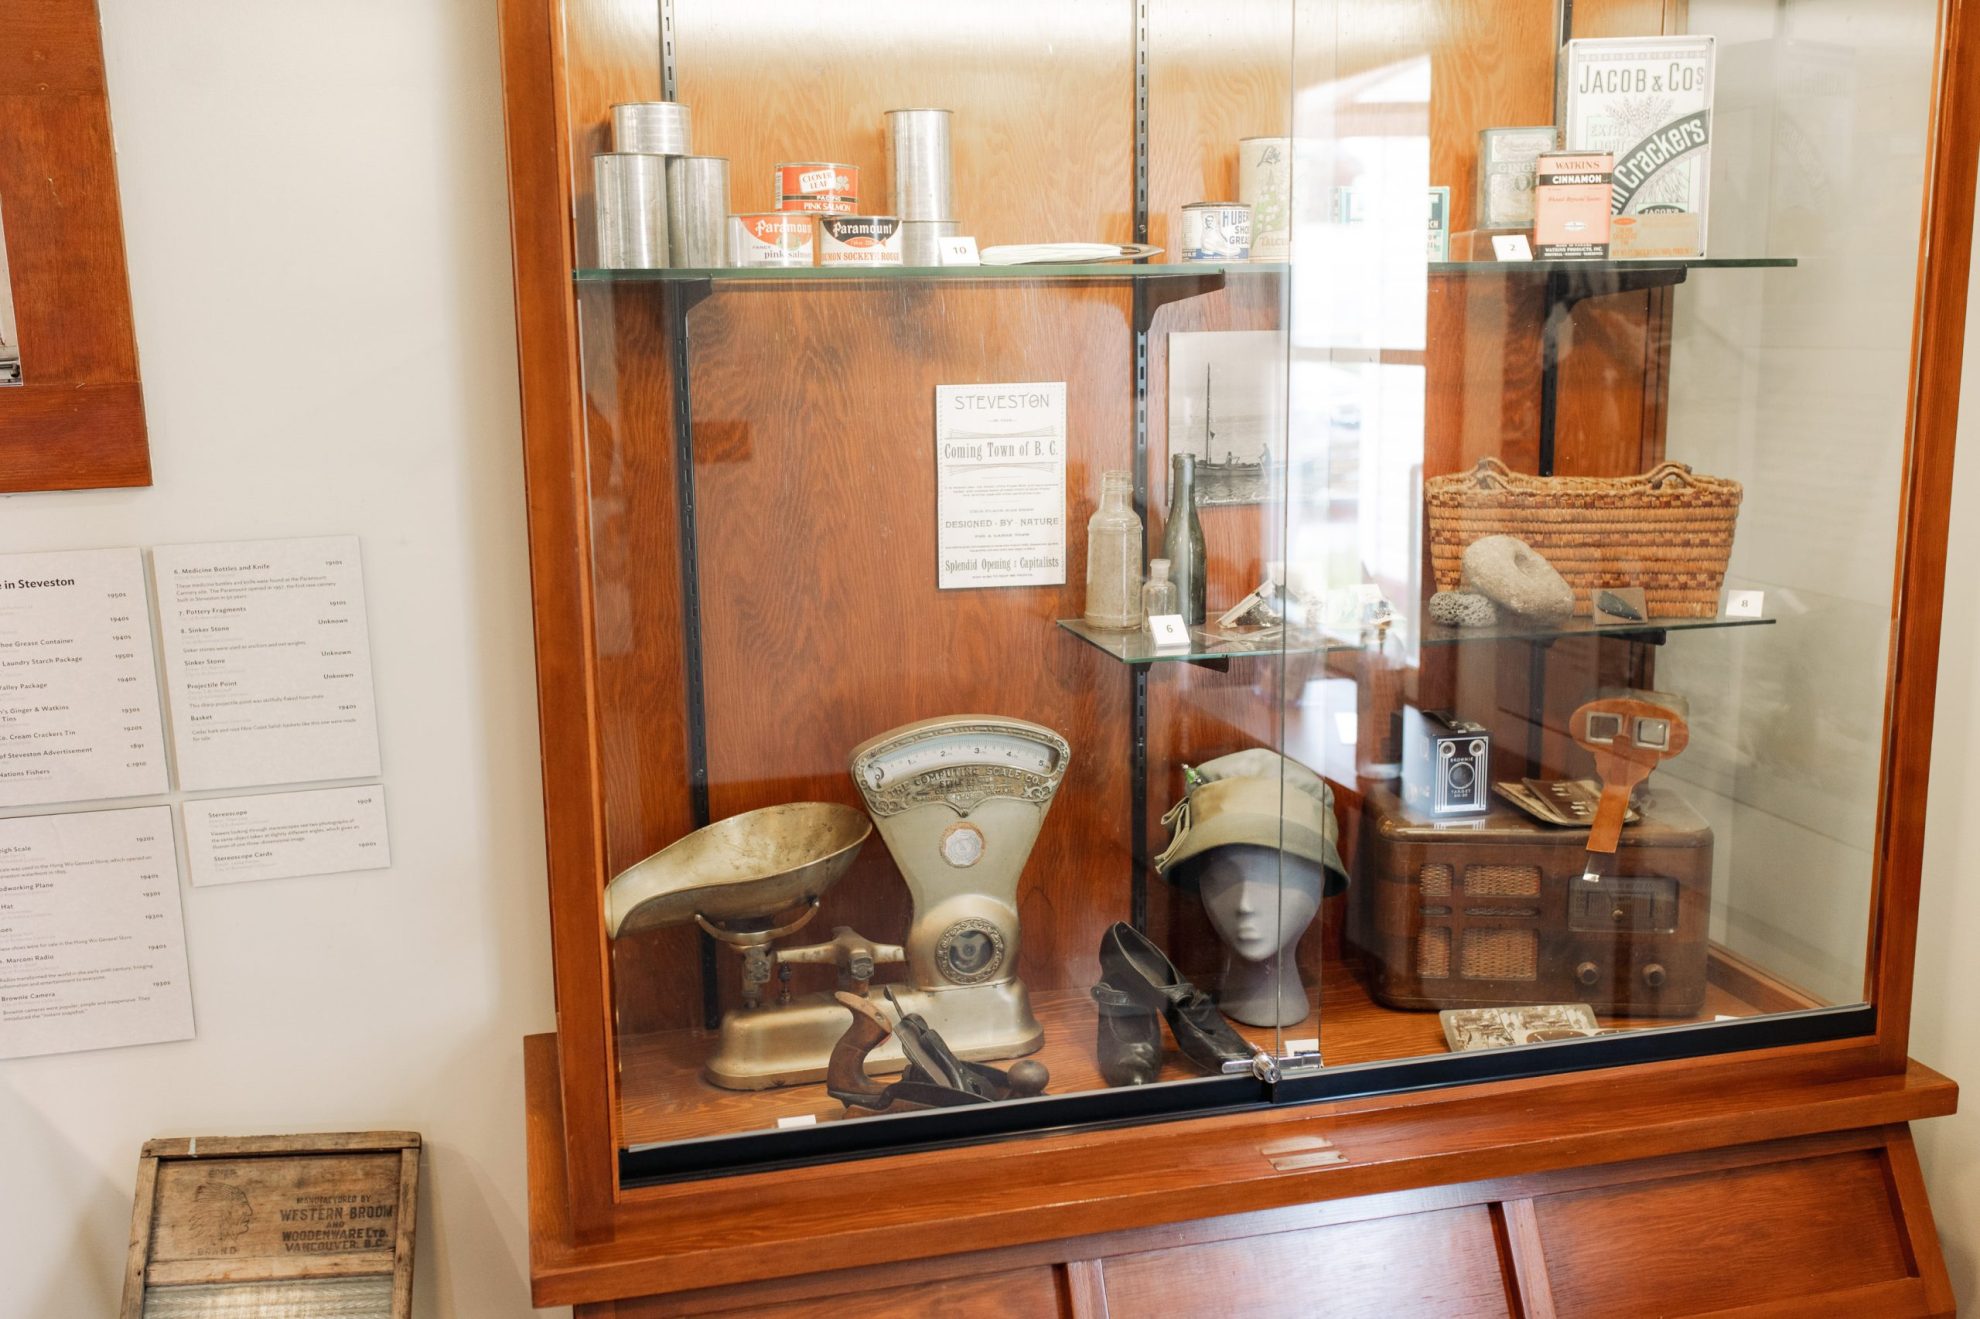 Collection of old household artefacts on display in glass case